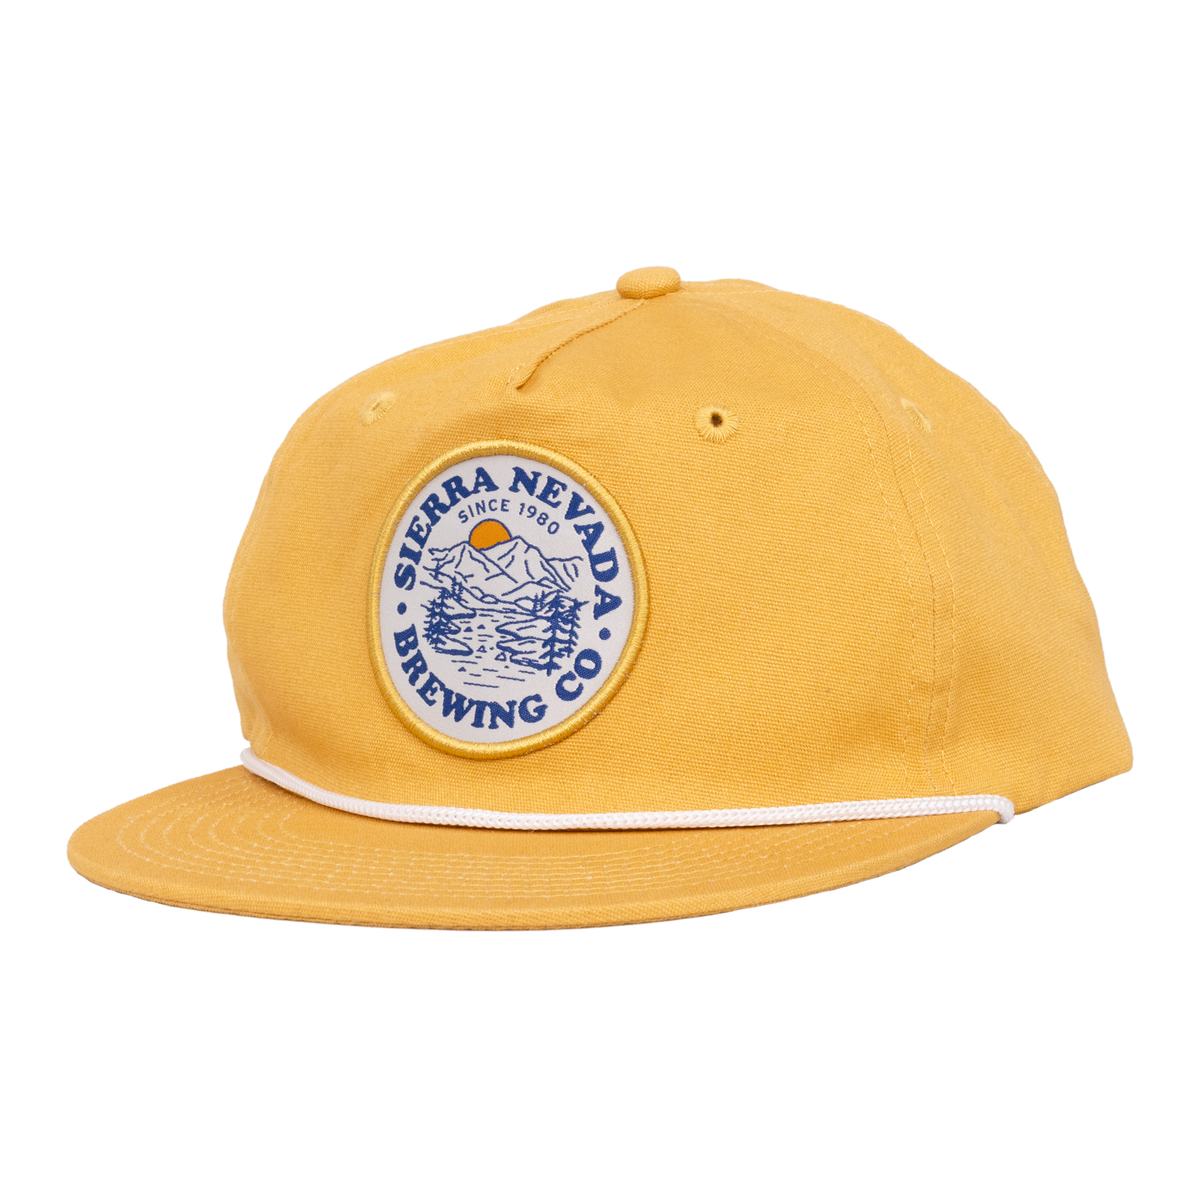 Sierra Nevada Brewing Co. yellow Five Panel Canvas Rope Hat front view